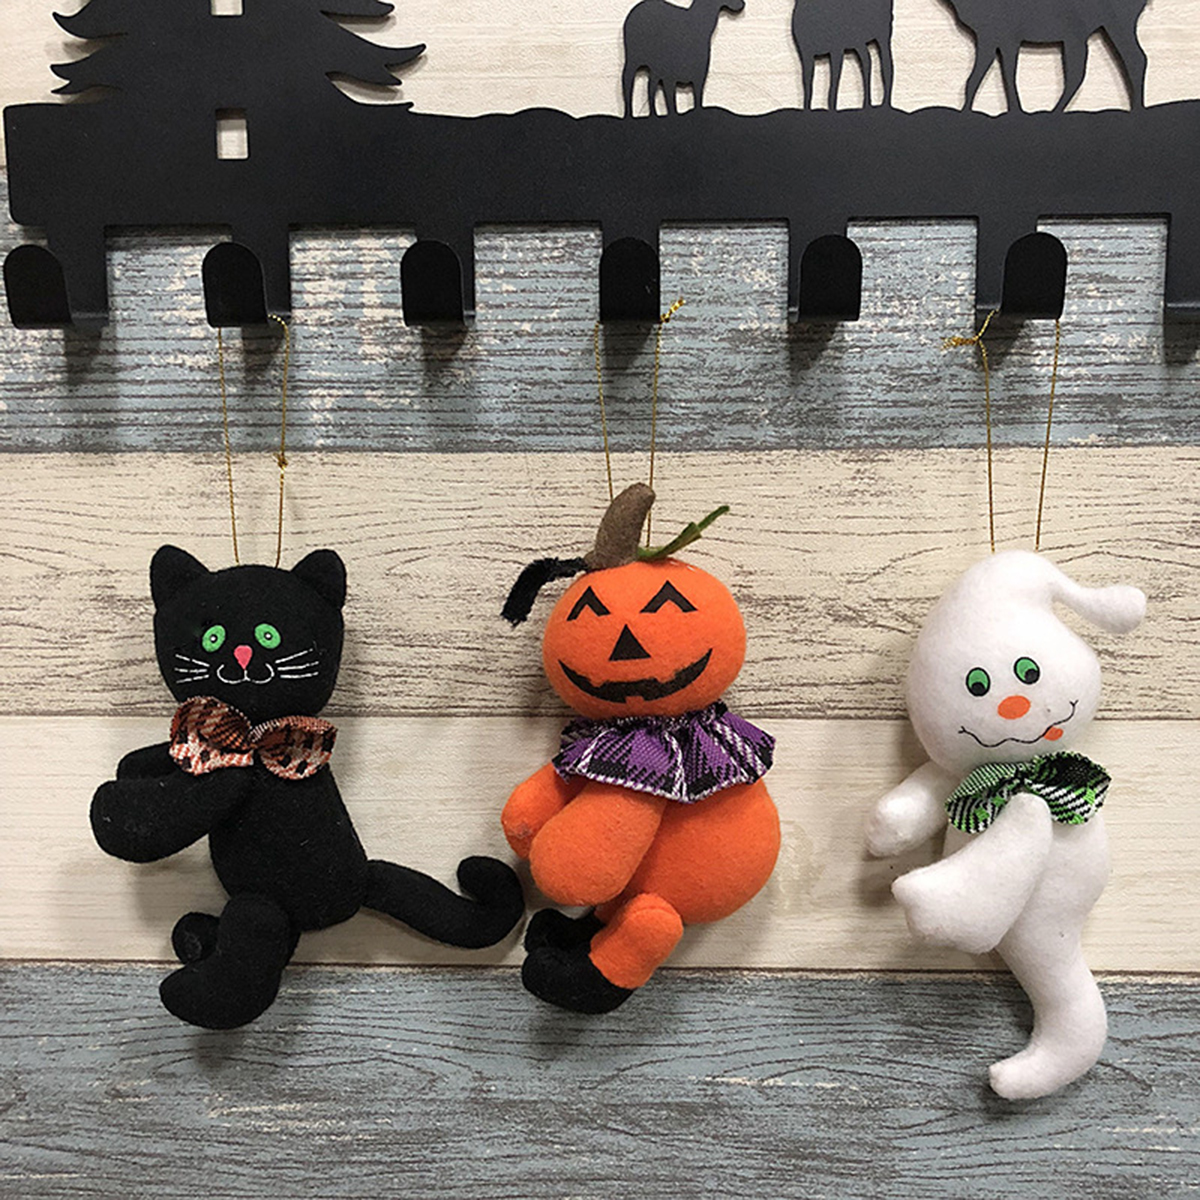 Halloween-Pumpkin-Cat-Ghost-Doll-Cloth-Plush-Toy-Club-Home-Exquisite-Decor-Gift-1342802-1